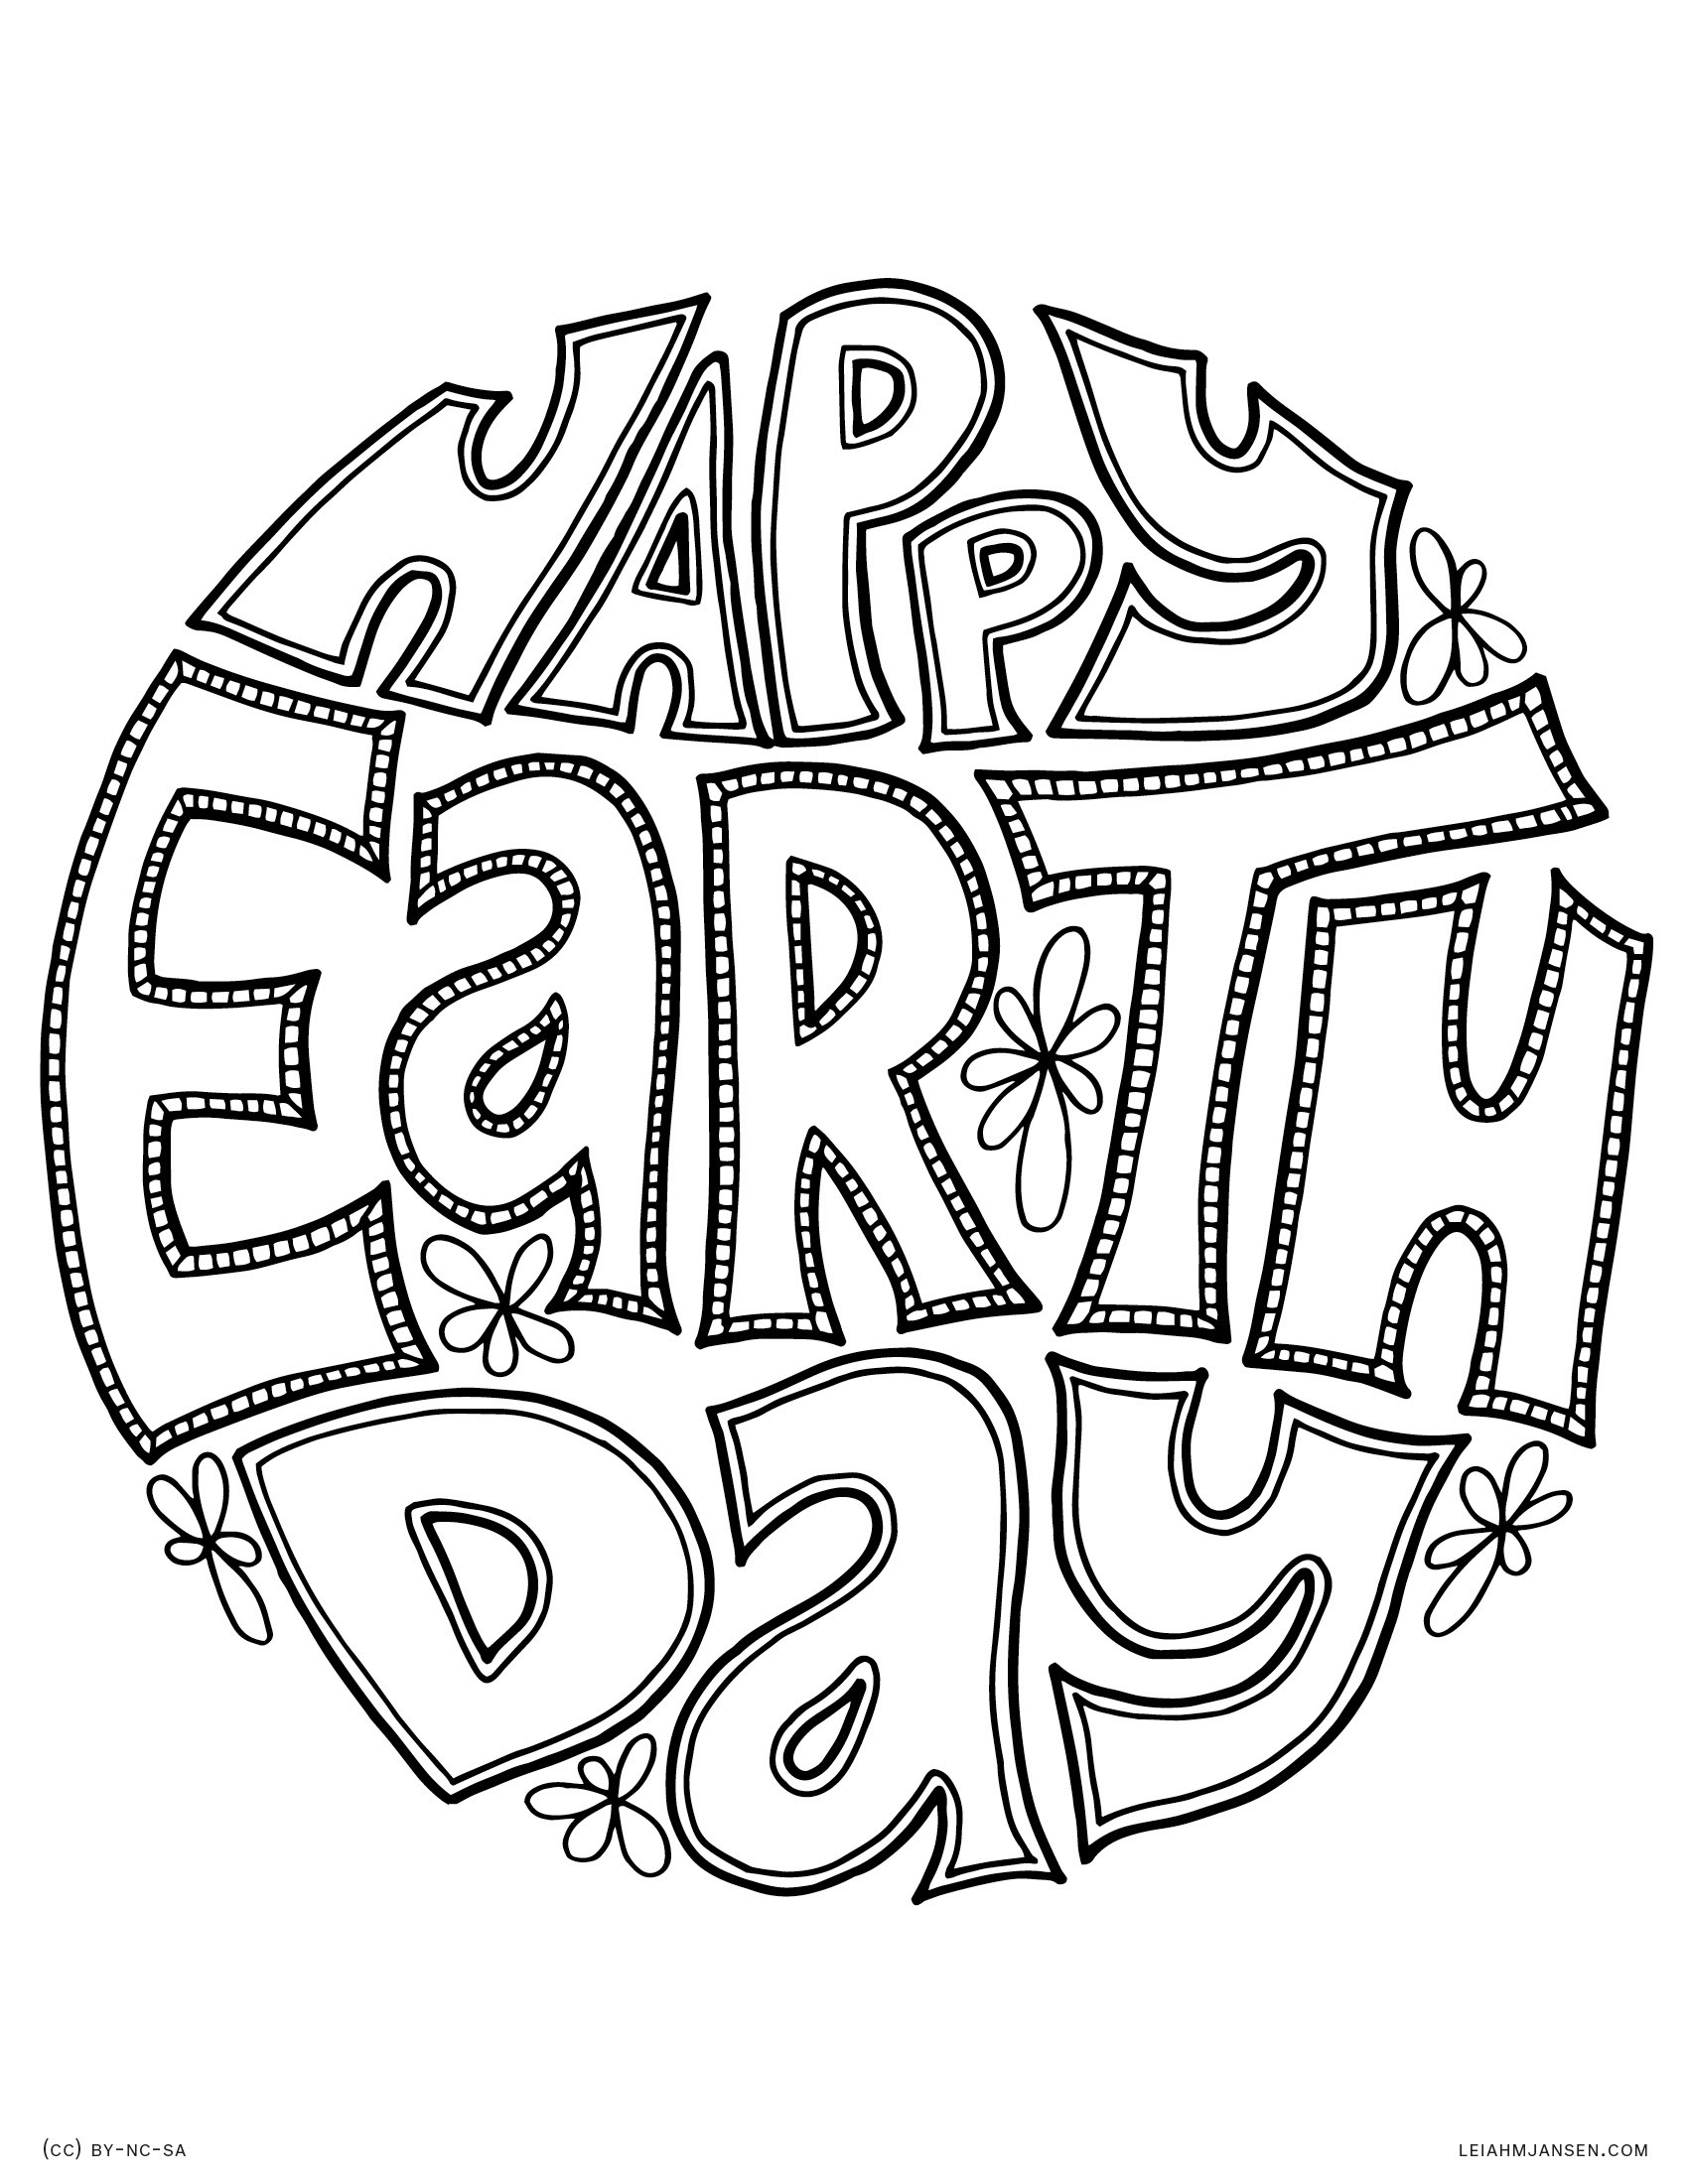 Earth Day Coloring Pages
 Coloring Pages